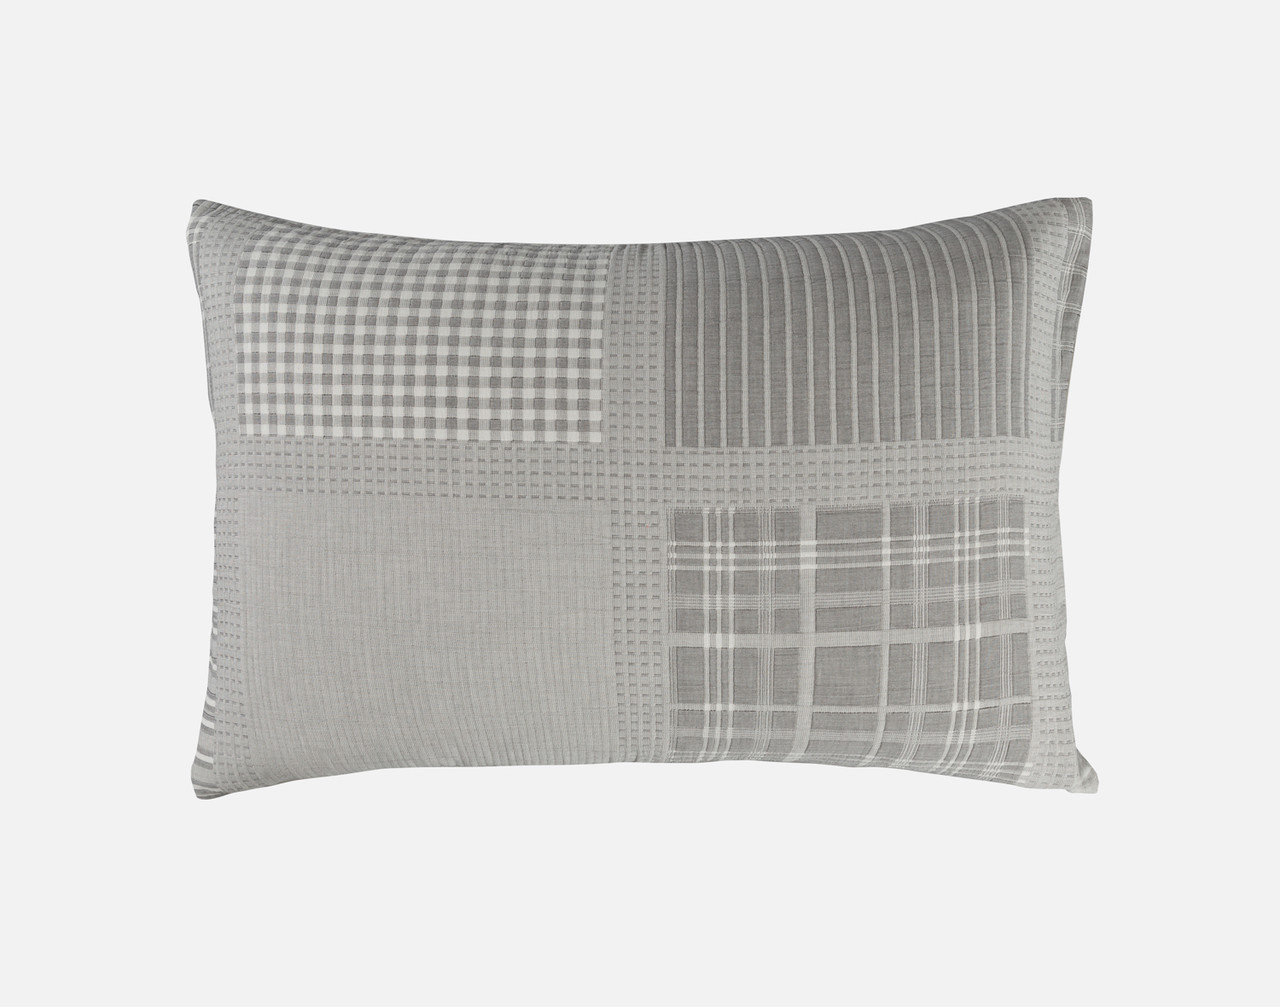 Front view of our checkered Reid Pillow Sham.